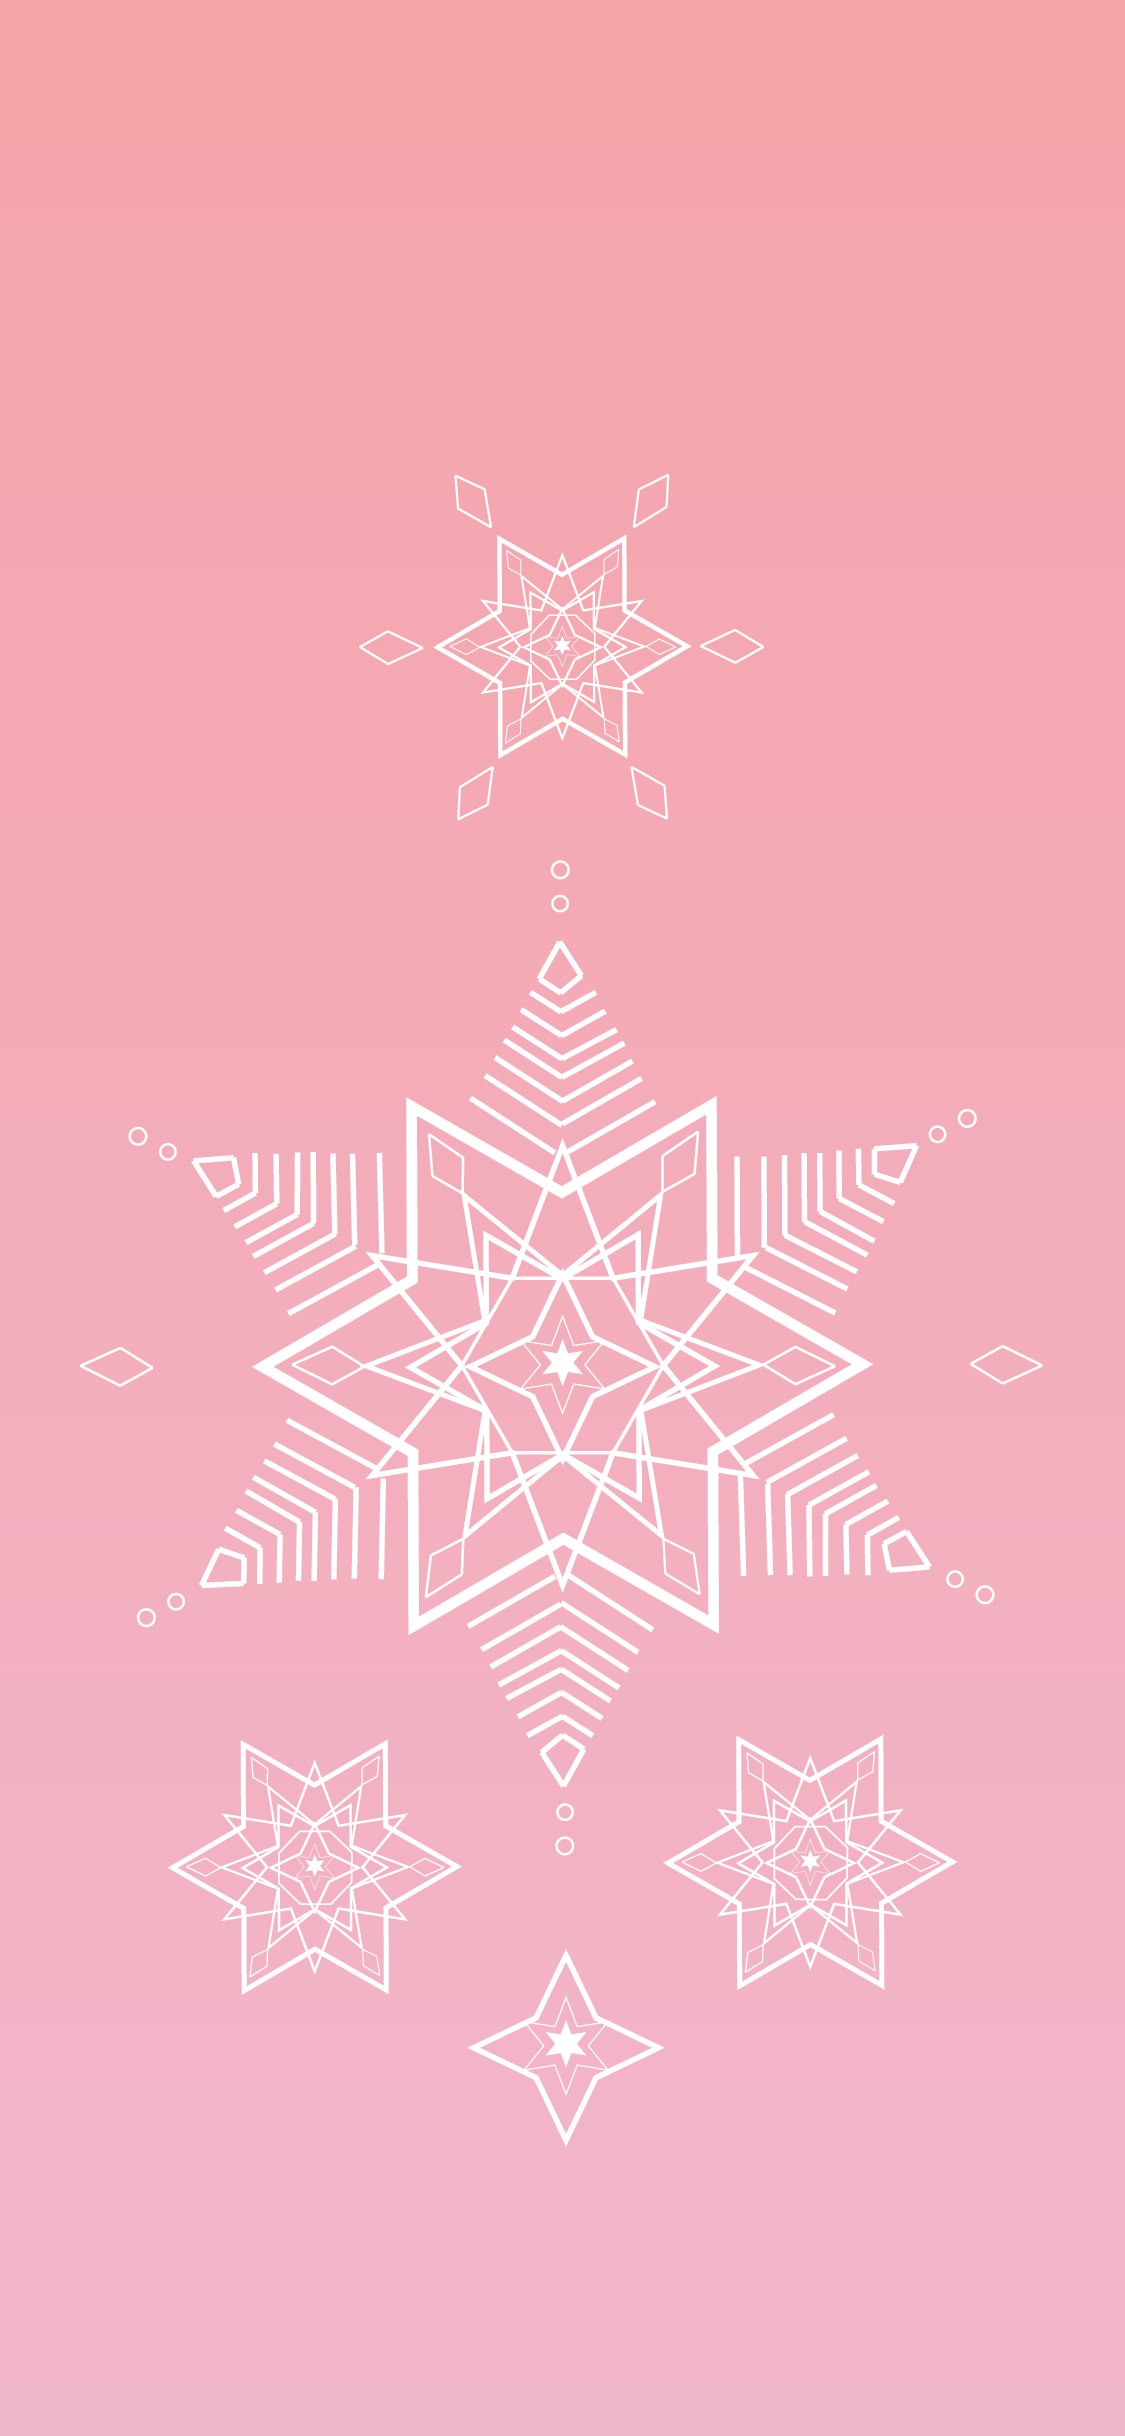 Girly Snowflake Wallpaper for iPhone